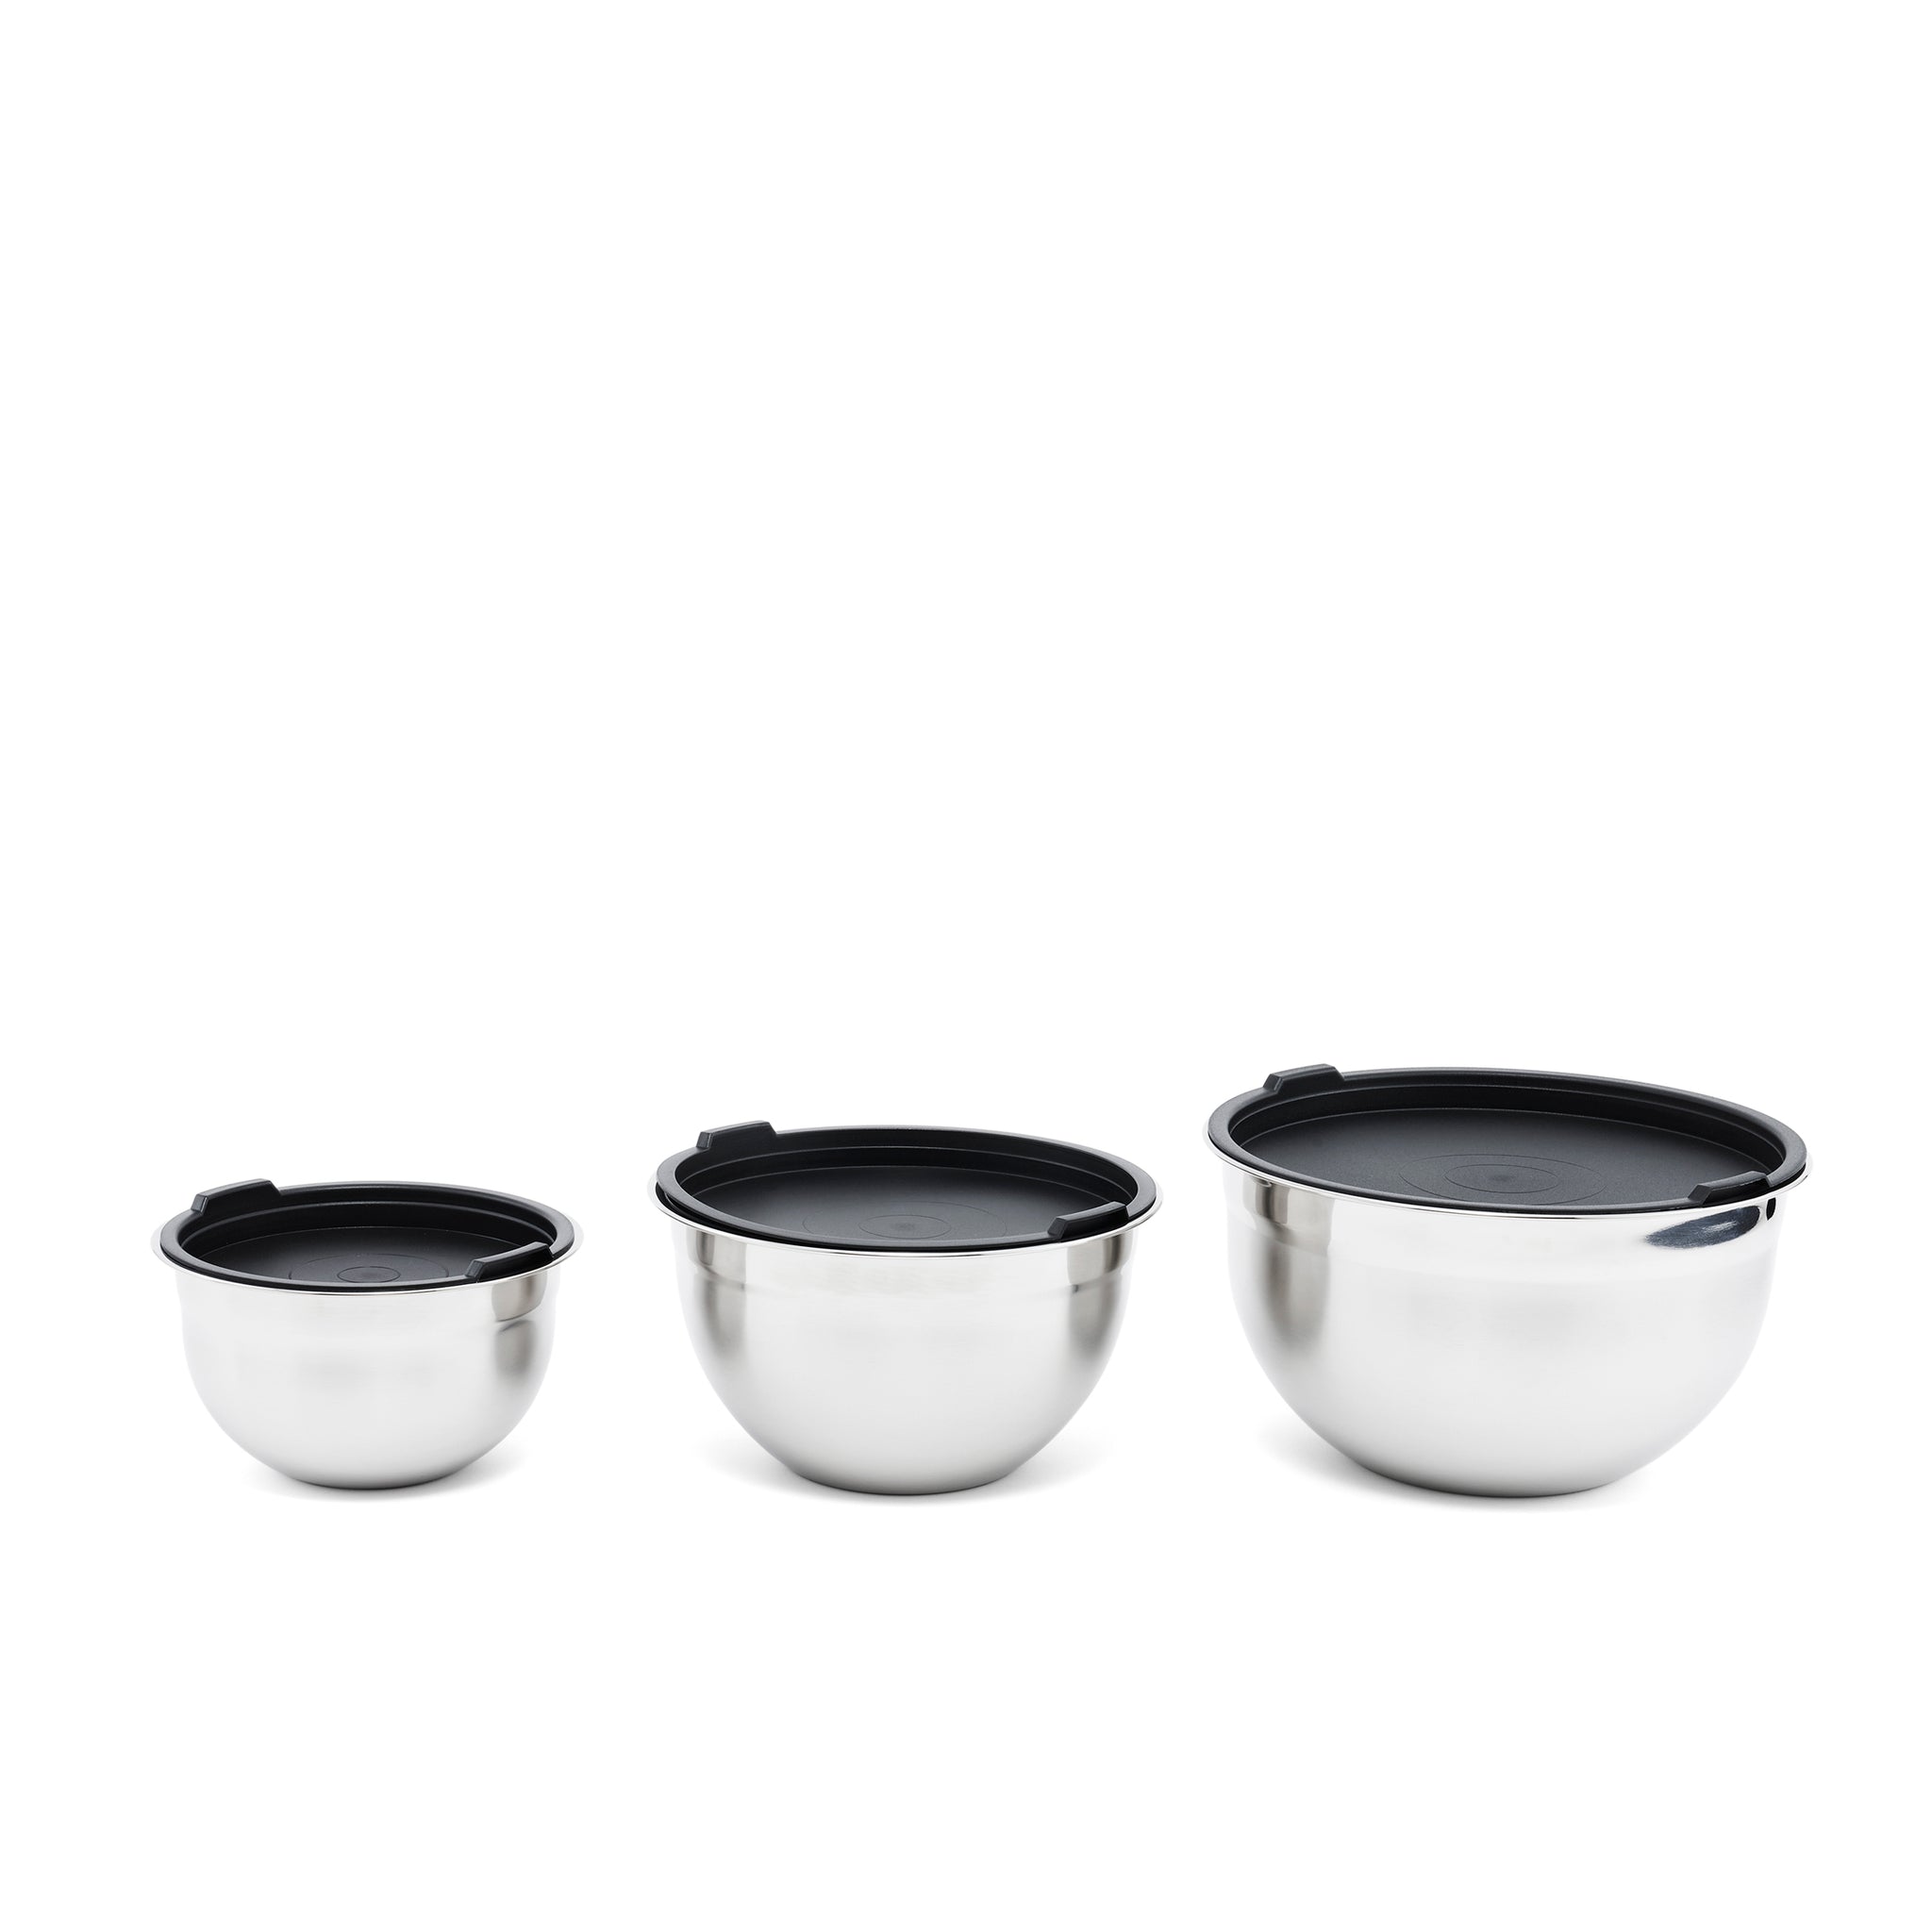 Aava - Stainless Steel Salad Bowl Set of 3pcs